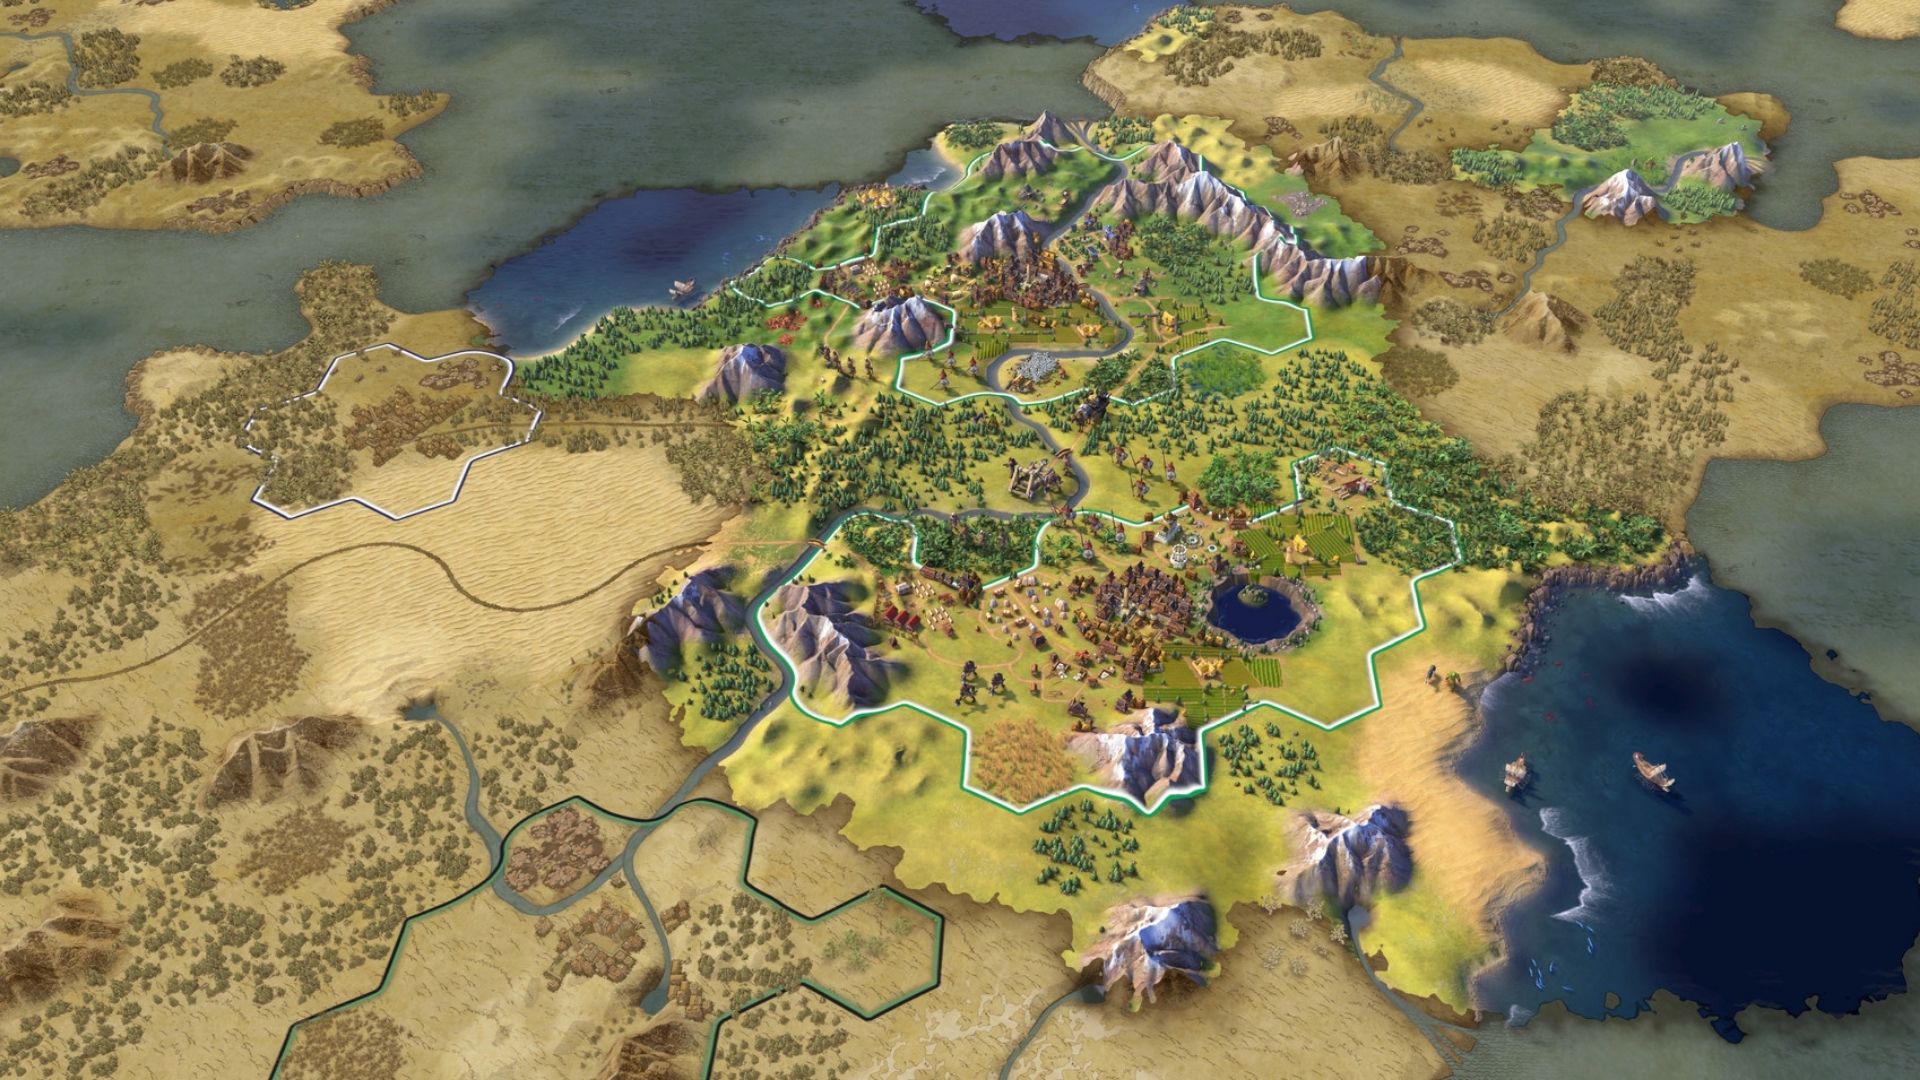 Best city-building games: Civilization VI. Image shows a large landscape with mountains, deserts, oceans, and forests divided into hexagons.-